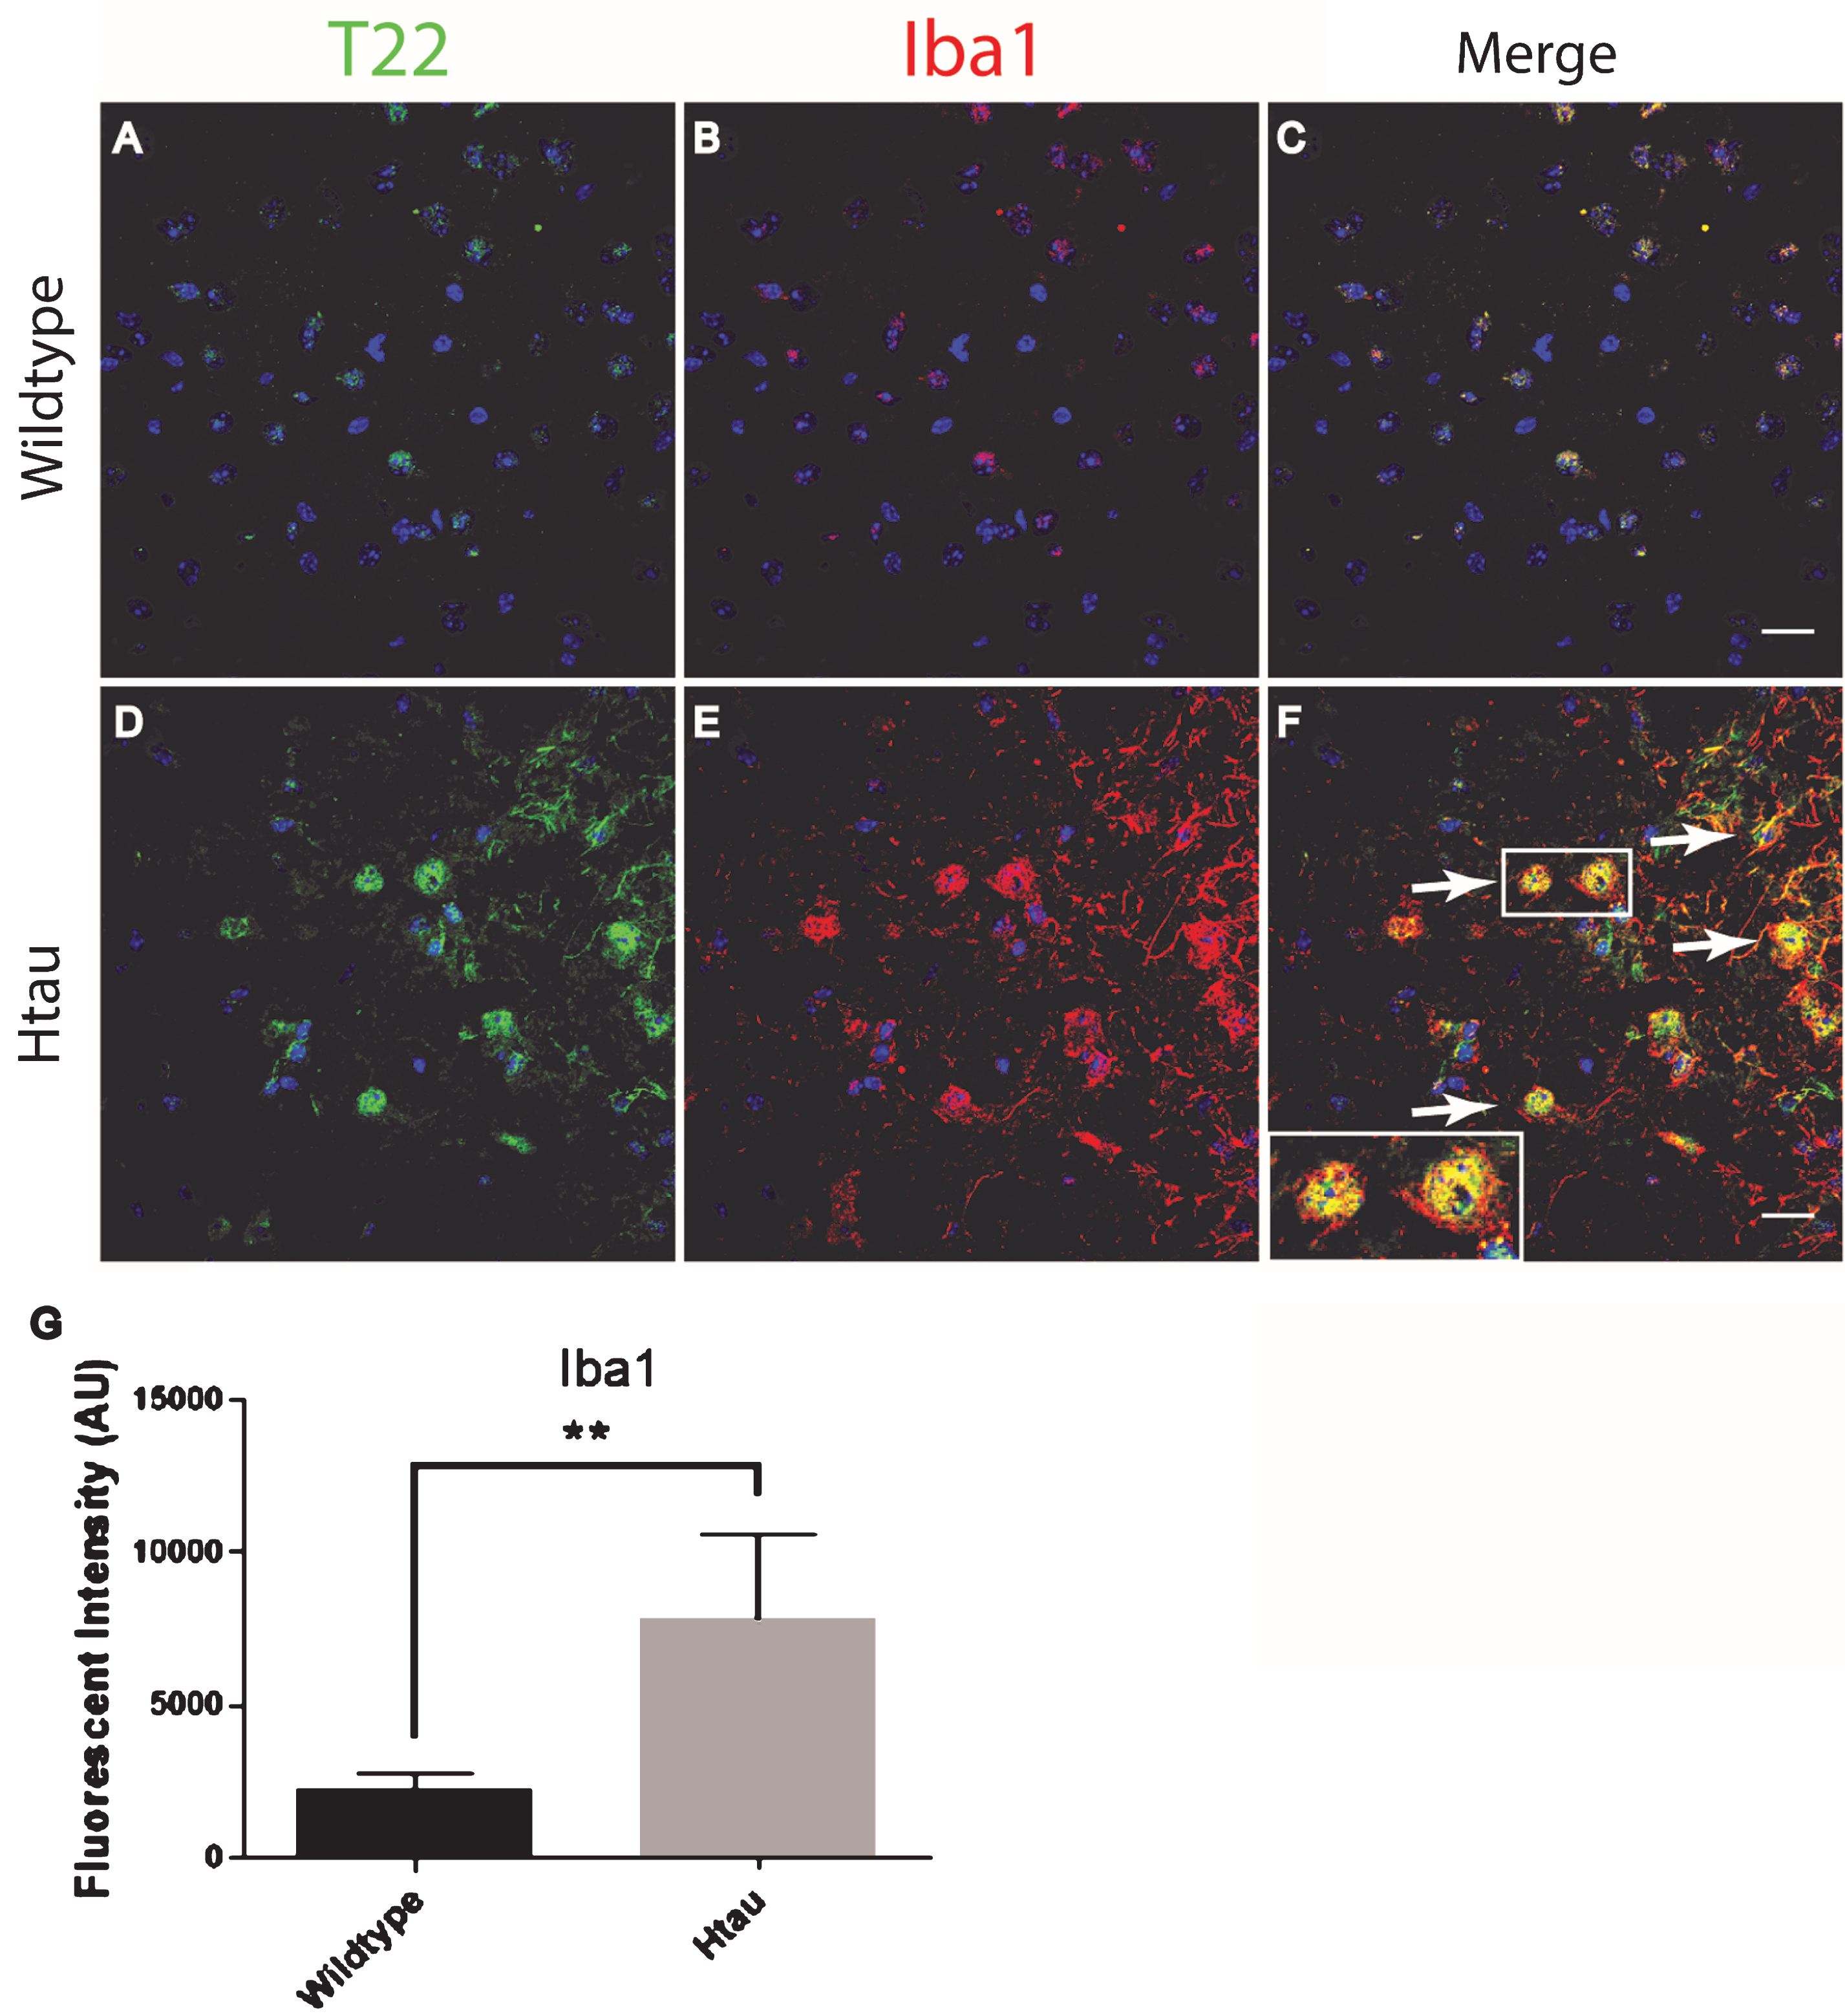 Microglia co-localized with tau oligomers in an aged human tau transgenic mouse model but not in wildtype mouse cortical brain regions. A-C) Minimal microglia Iba1 (red) activation was observed in WT mice. D-F) An increase in activated microglia detected by Iba1 was seen co-localizing with T22 positive tau oligomers (green) in 24-month-old Htau mice. A few examples of microglia co-localizing with T22 positive tau oligomers are indicated by the arrows. G) 24-month-old Htau mice had significantly higher Iba1 compared to WT according to corrected cell fluorescence. **p < 0.01. Scale bar 20 μm.